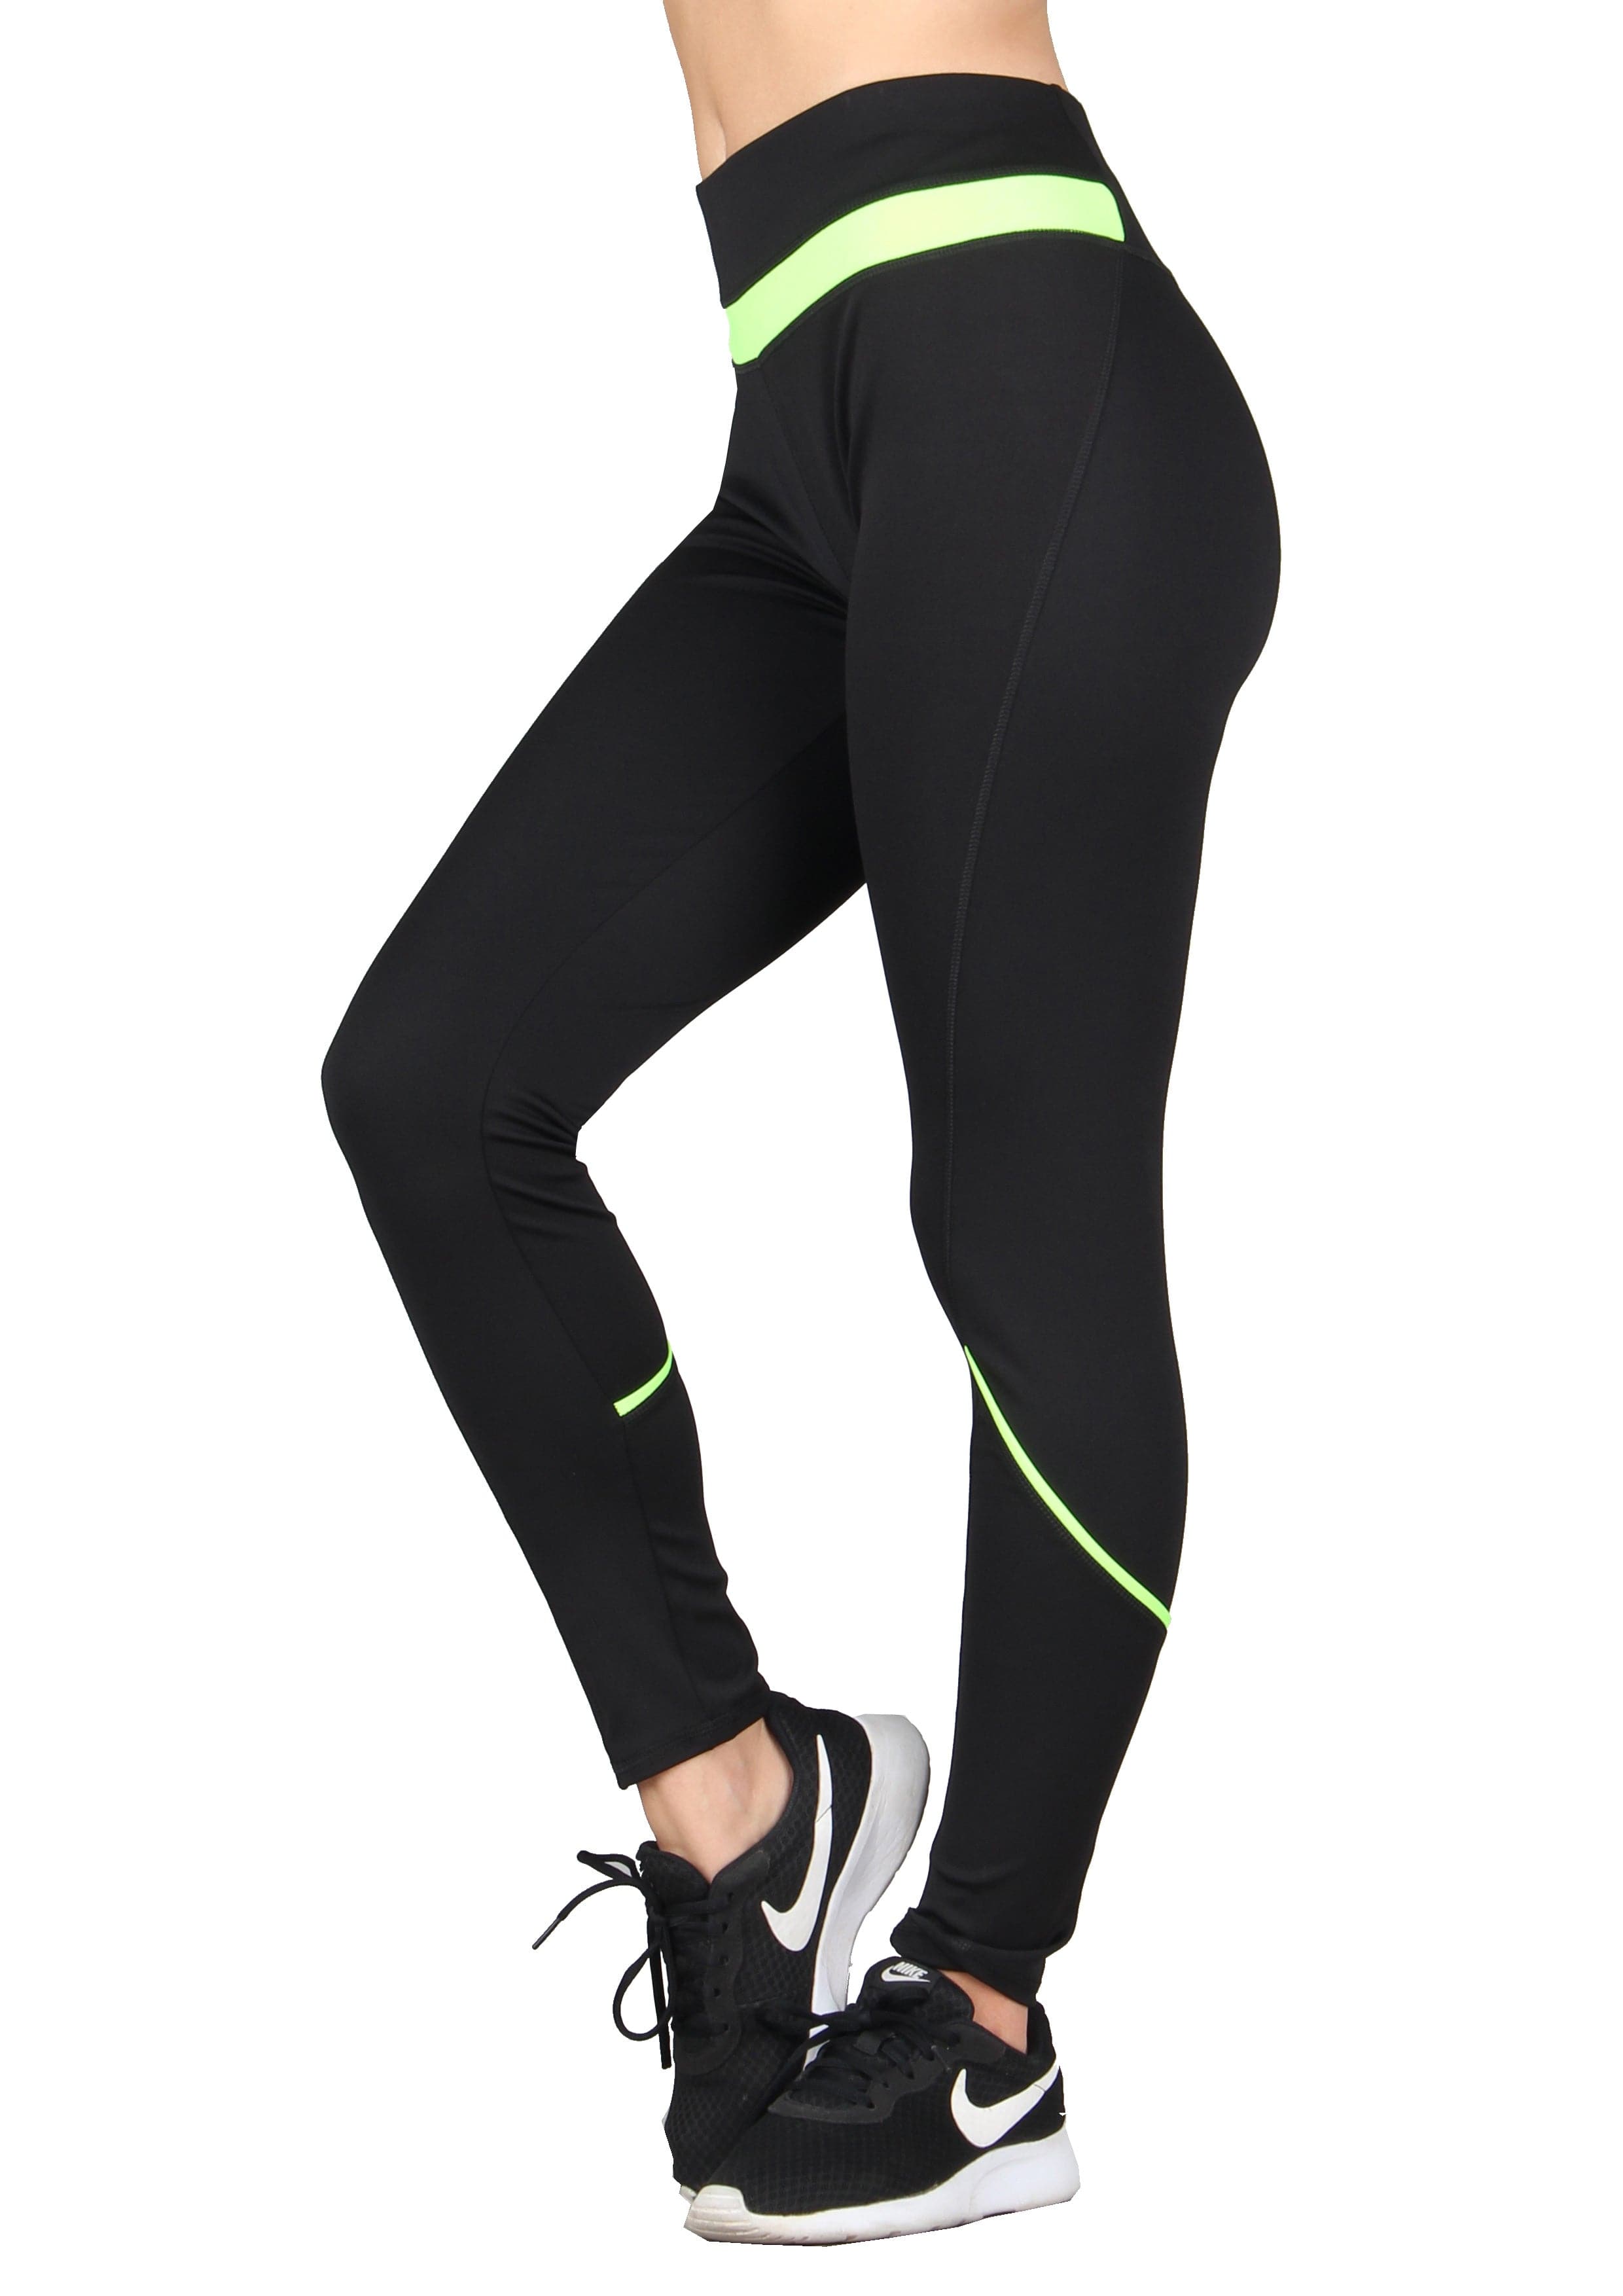 Amazon.com: PEPEPEACOCK Quick Dry Powerflex Compression Baselayer Pants  Legging Tights for Men - Neon Green, XXX-Large : Clothing, Shoes & Jewelry